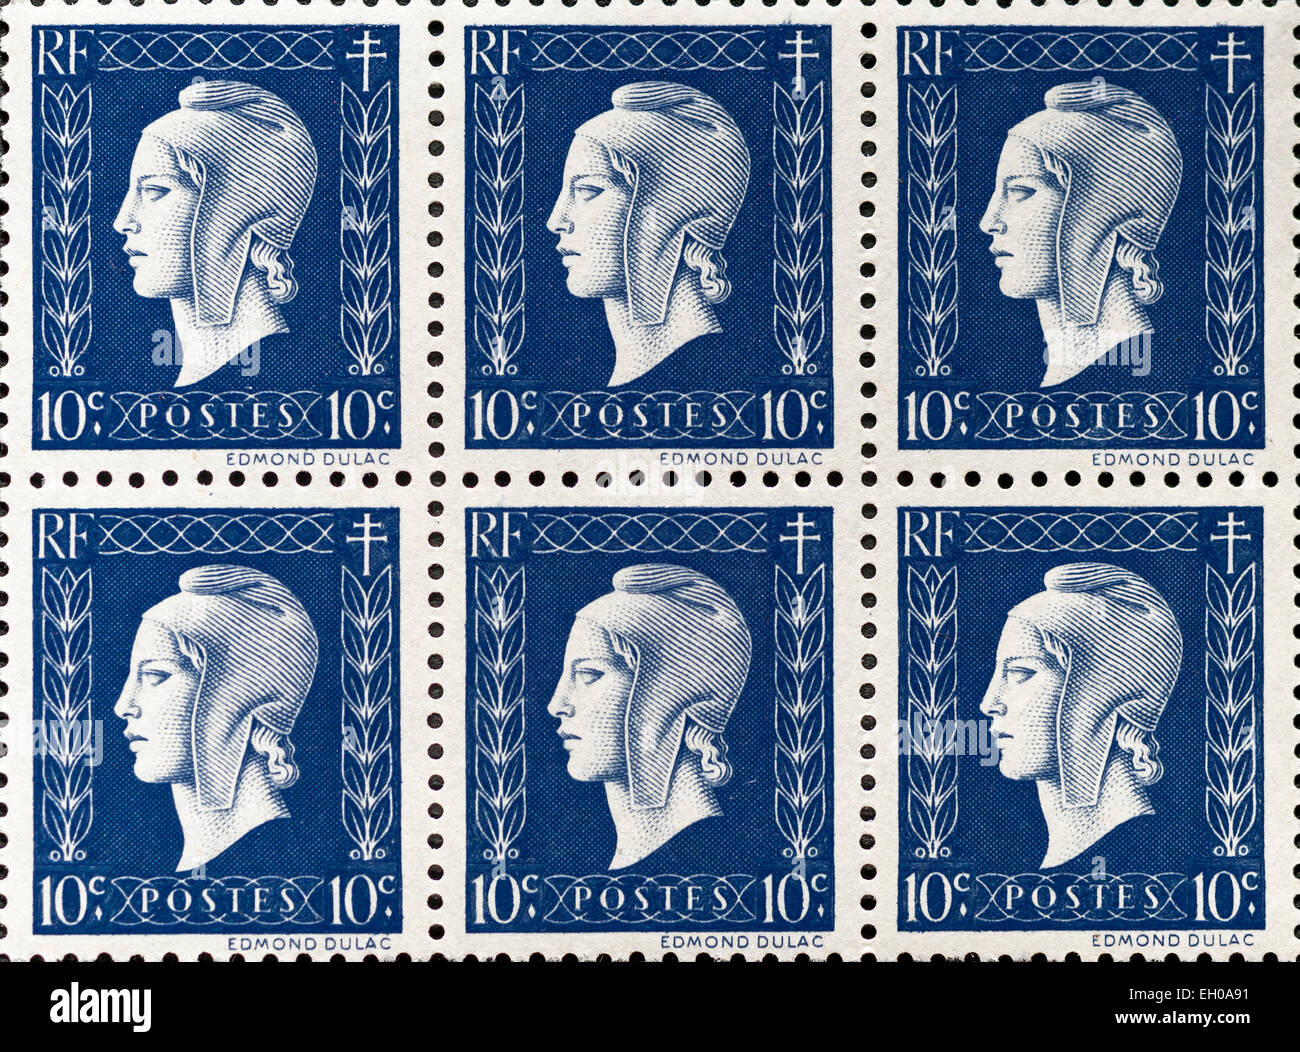 Block of six unused 10c “Marianne de Dulac” French definitive postage stamp, 1944/45. Stock Photo